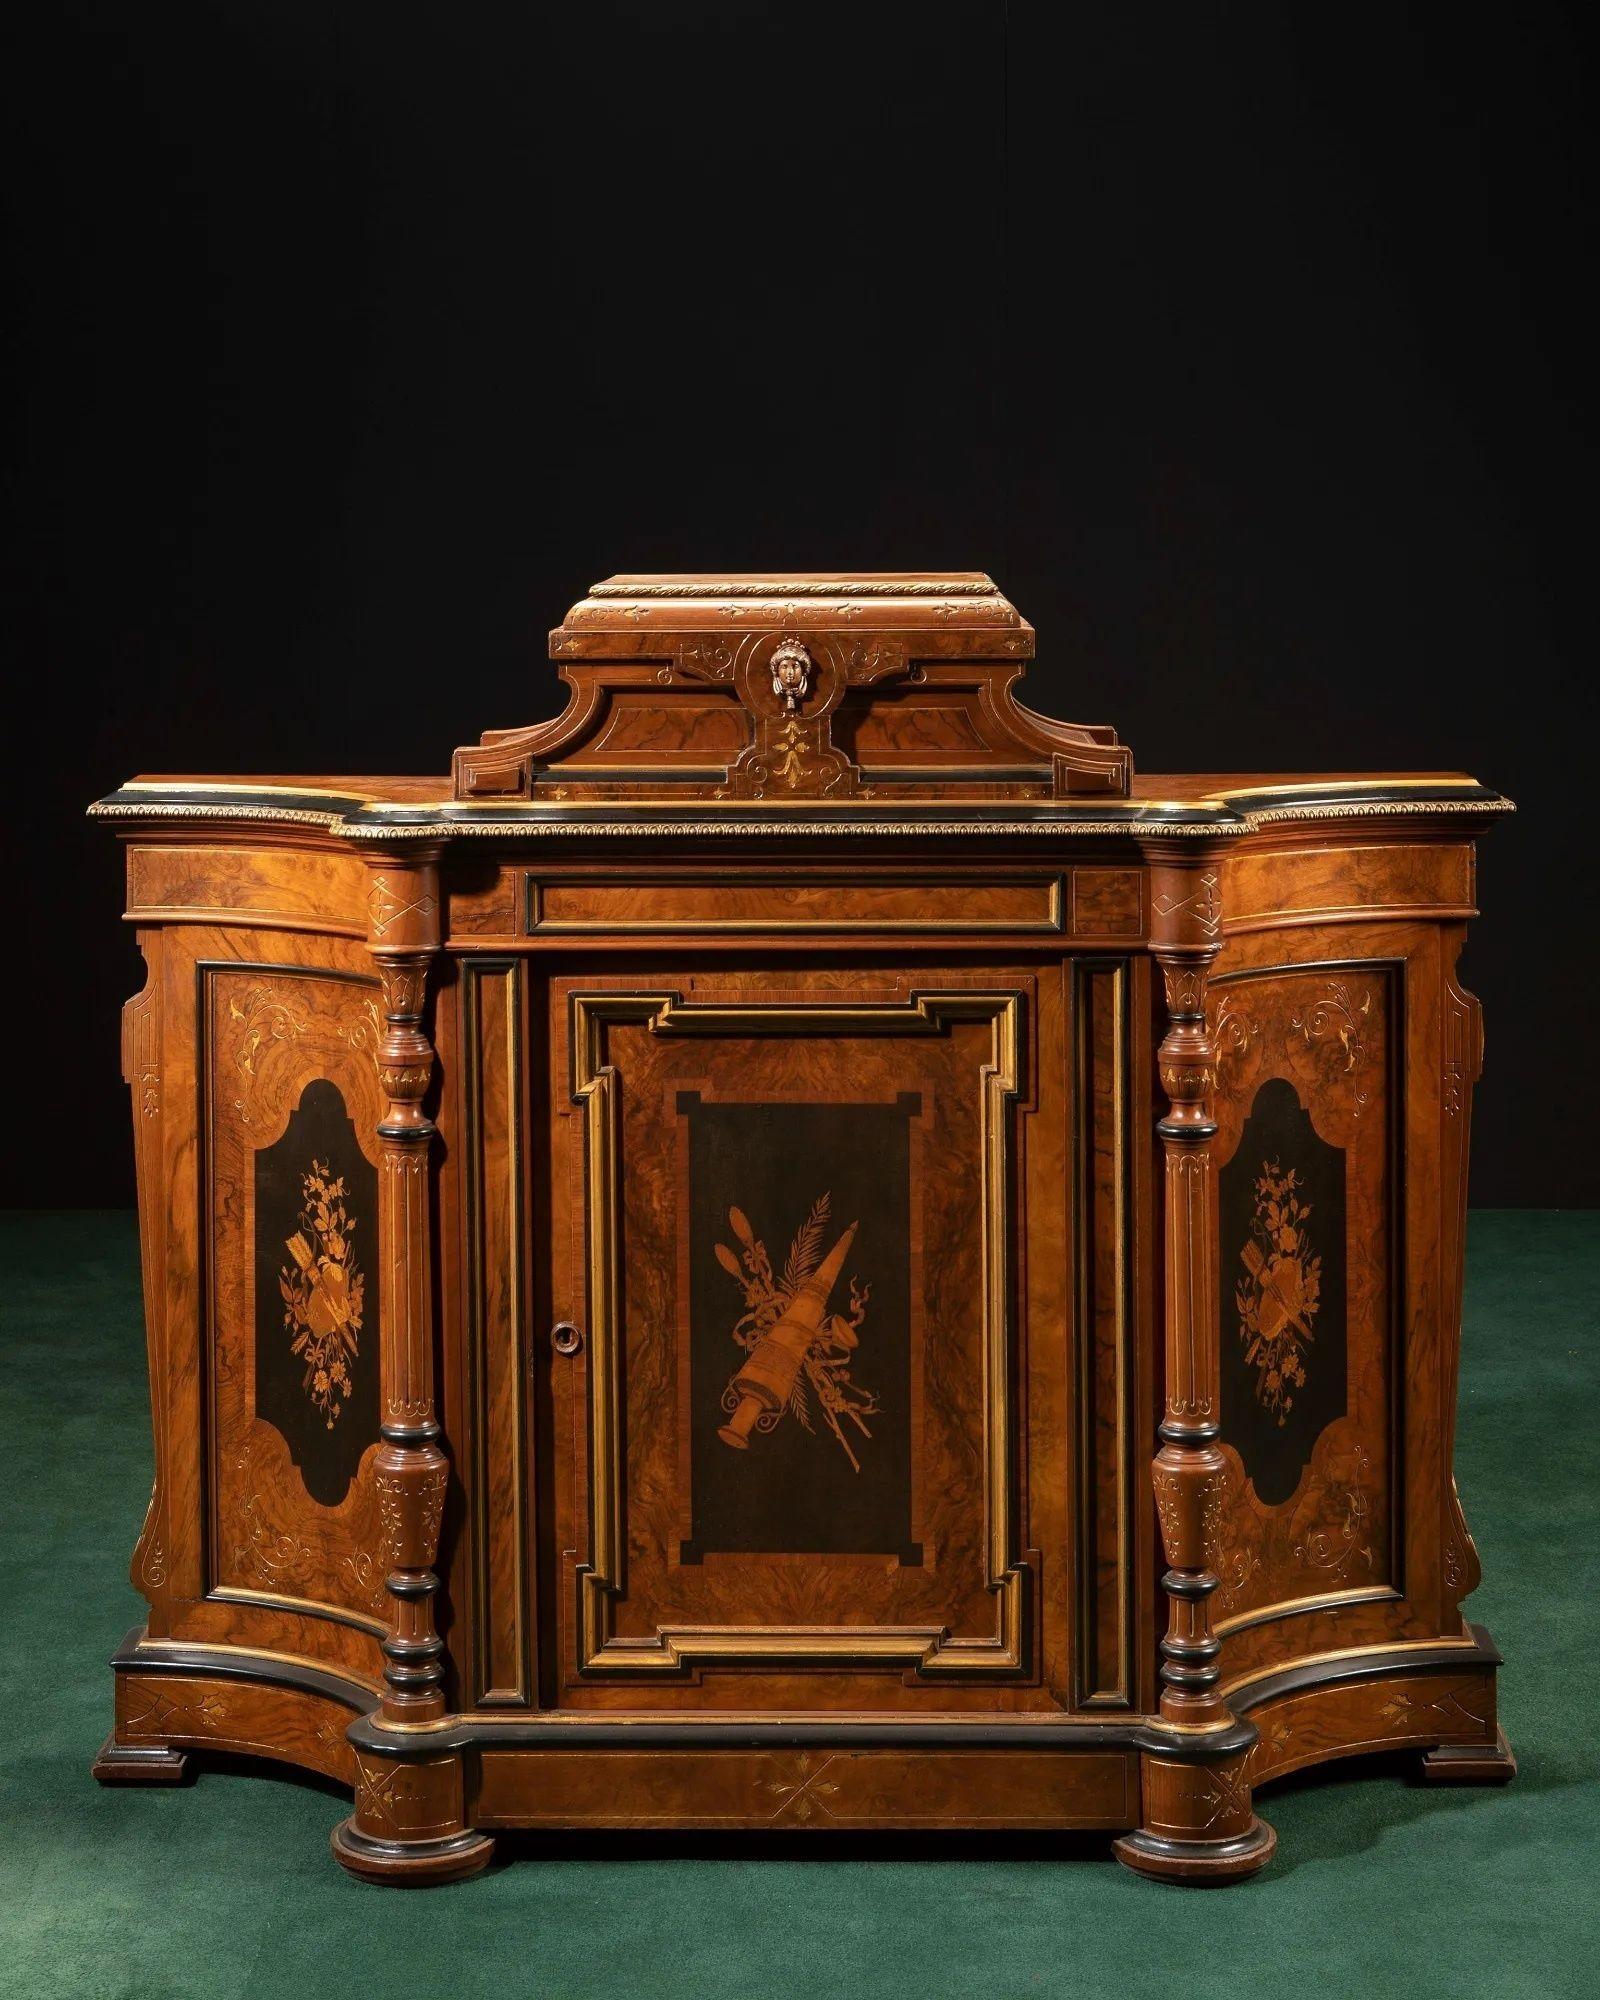 Late 19th century Italian revival cabinet.
 
Carved walnut and burl veneers, ebonized trim with gilt highlights, marquetry panels, bronze trim mounts, single door
 
Dimensions:
 
52.5